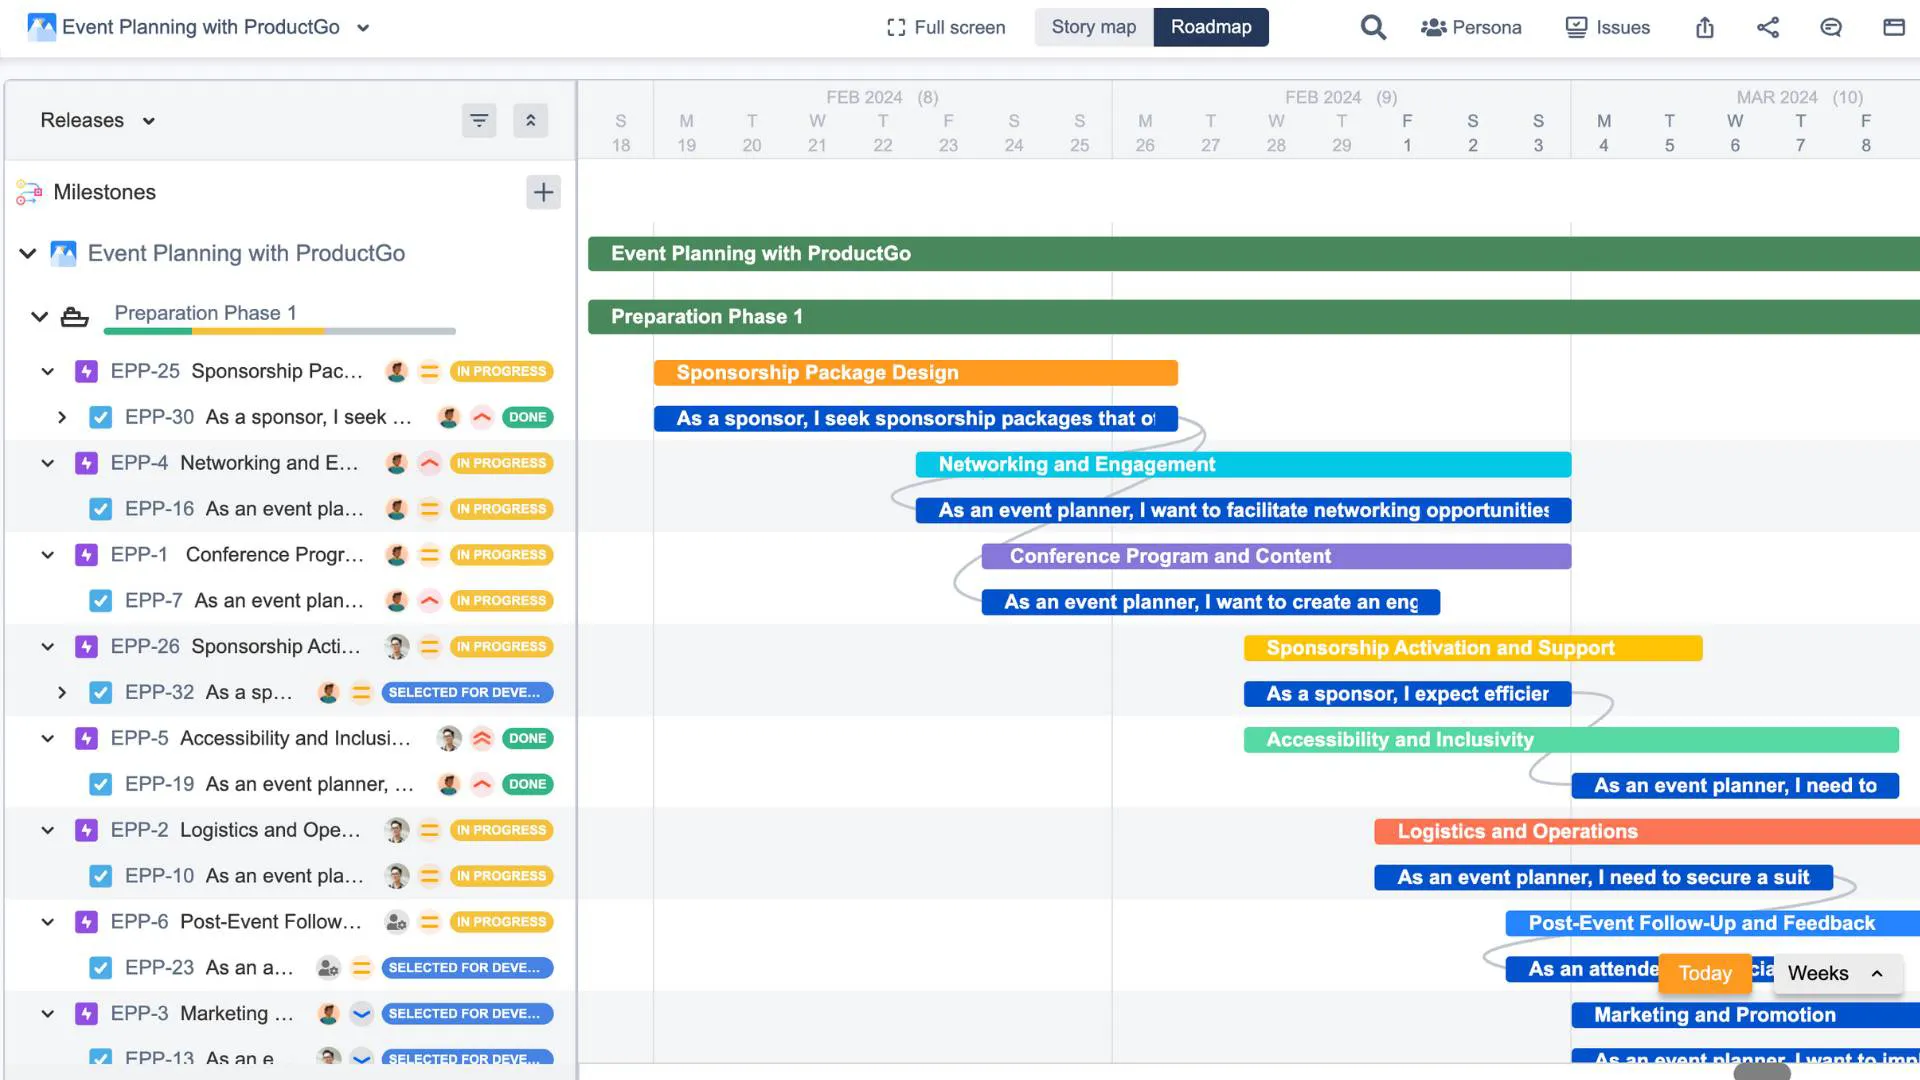 Strategies to Merge User Story Maps with Event Roadmaps